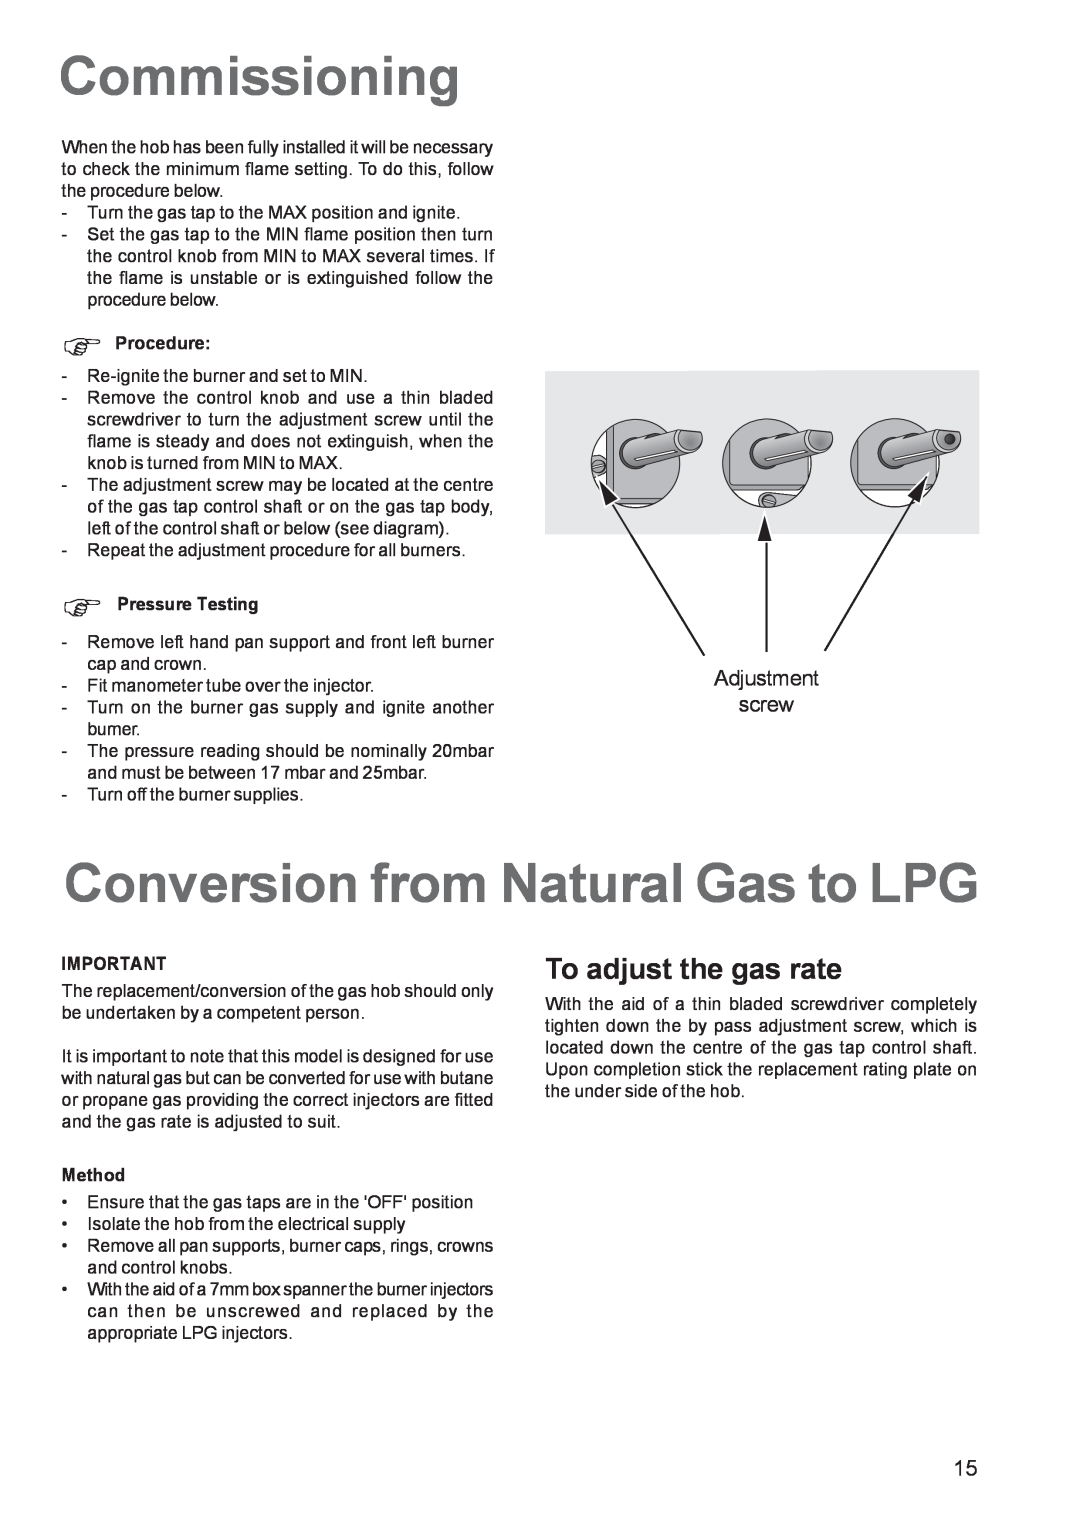 Zanussi ZGL 62 manual Commissioning, Conversion from Natural Gas to LPG, To adjust the gas rate, Adjustment screw 